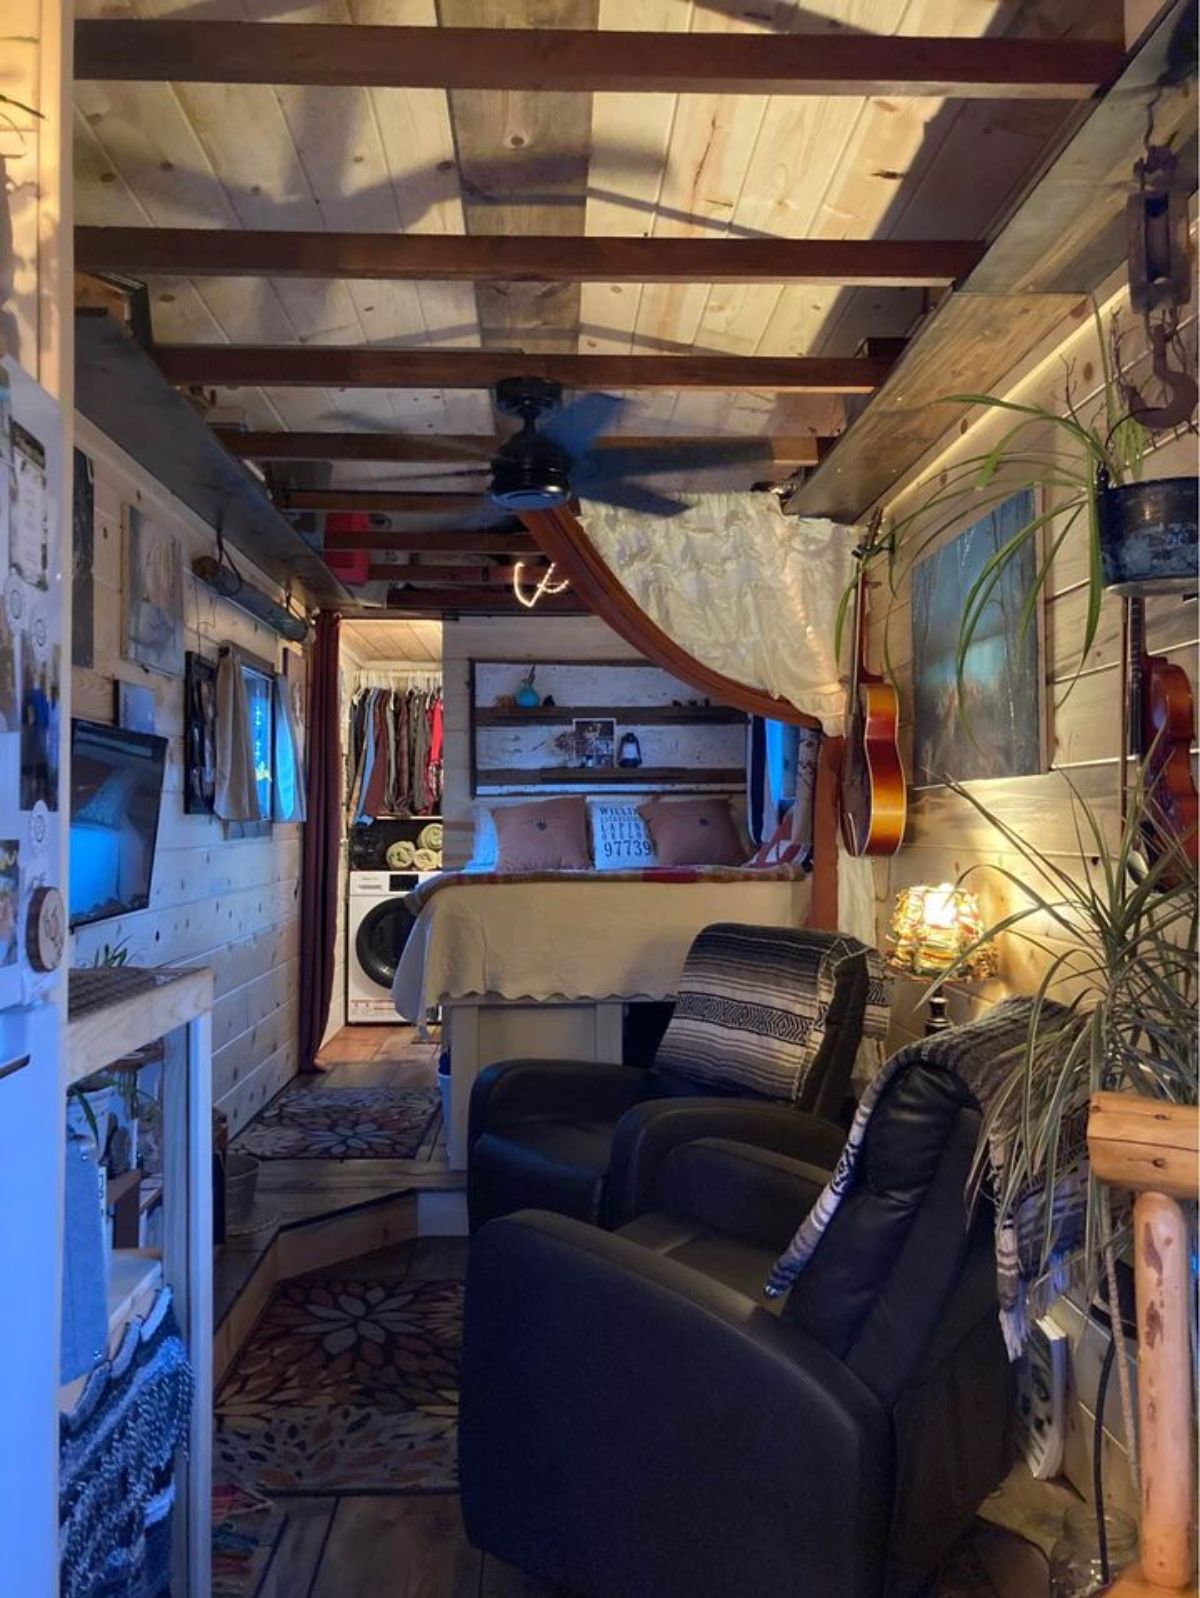 Living area of 240 sf Tiny House has a recliner and a television set